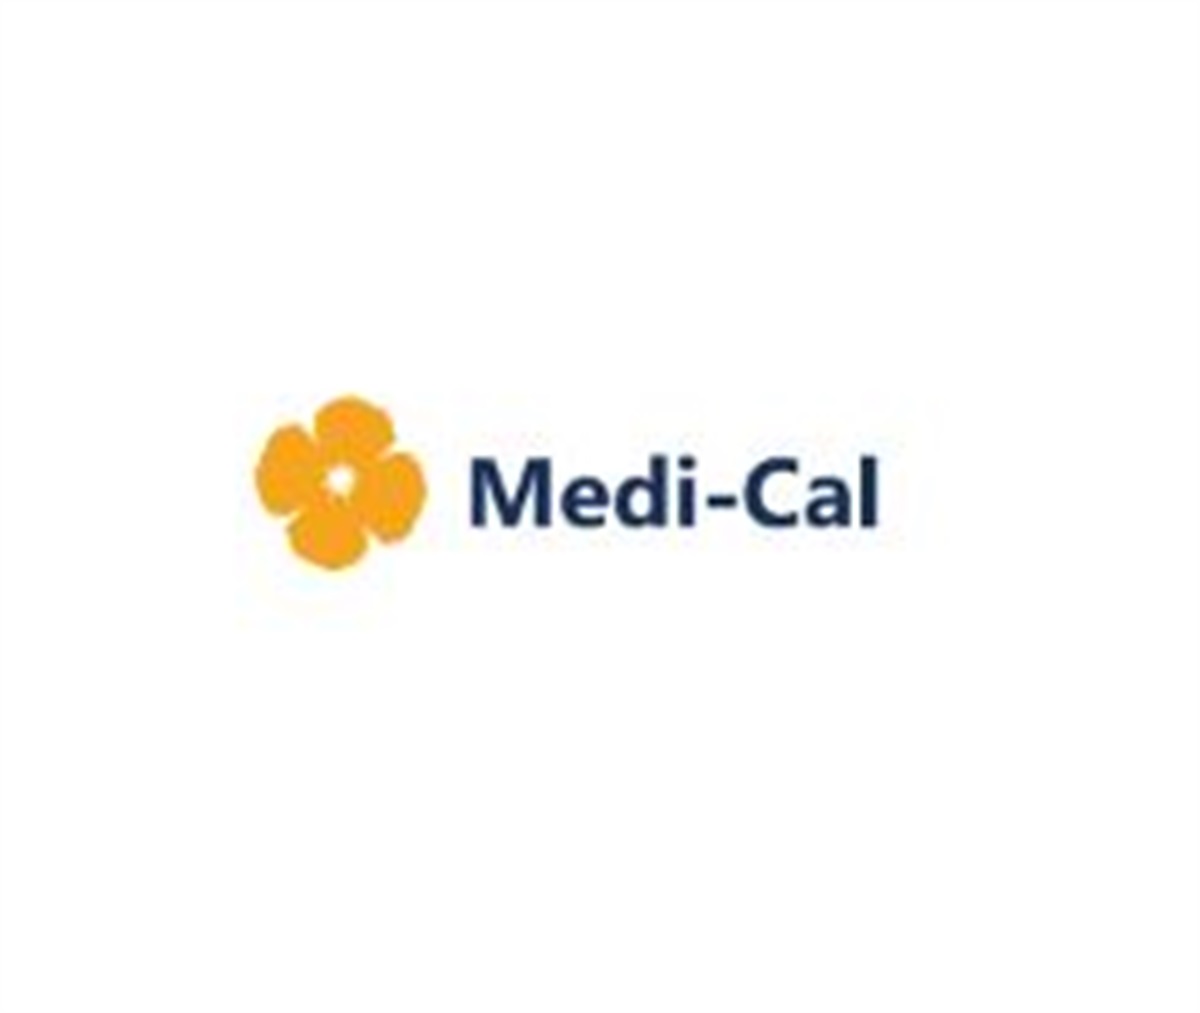 MEDI-CAL PROVIDERS THAT HAVE BEEN PAID VIA THE MEDI